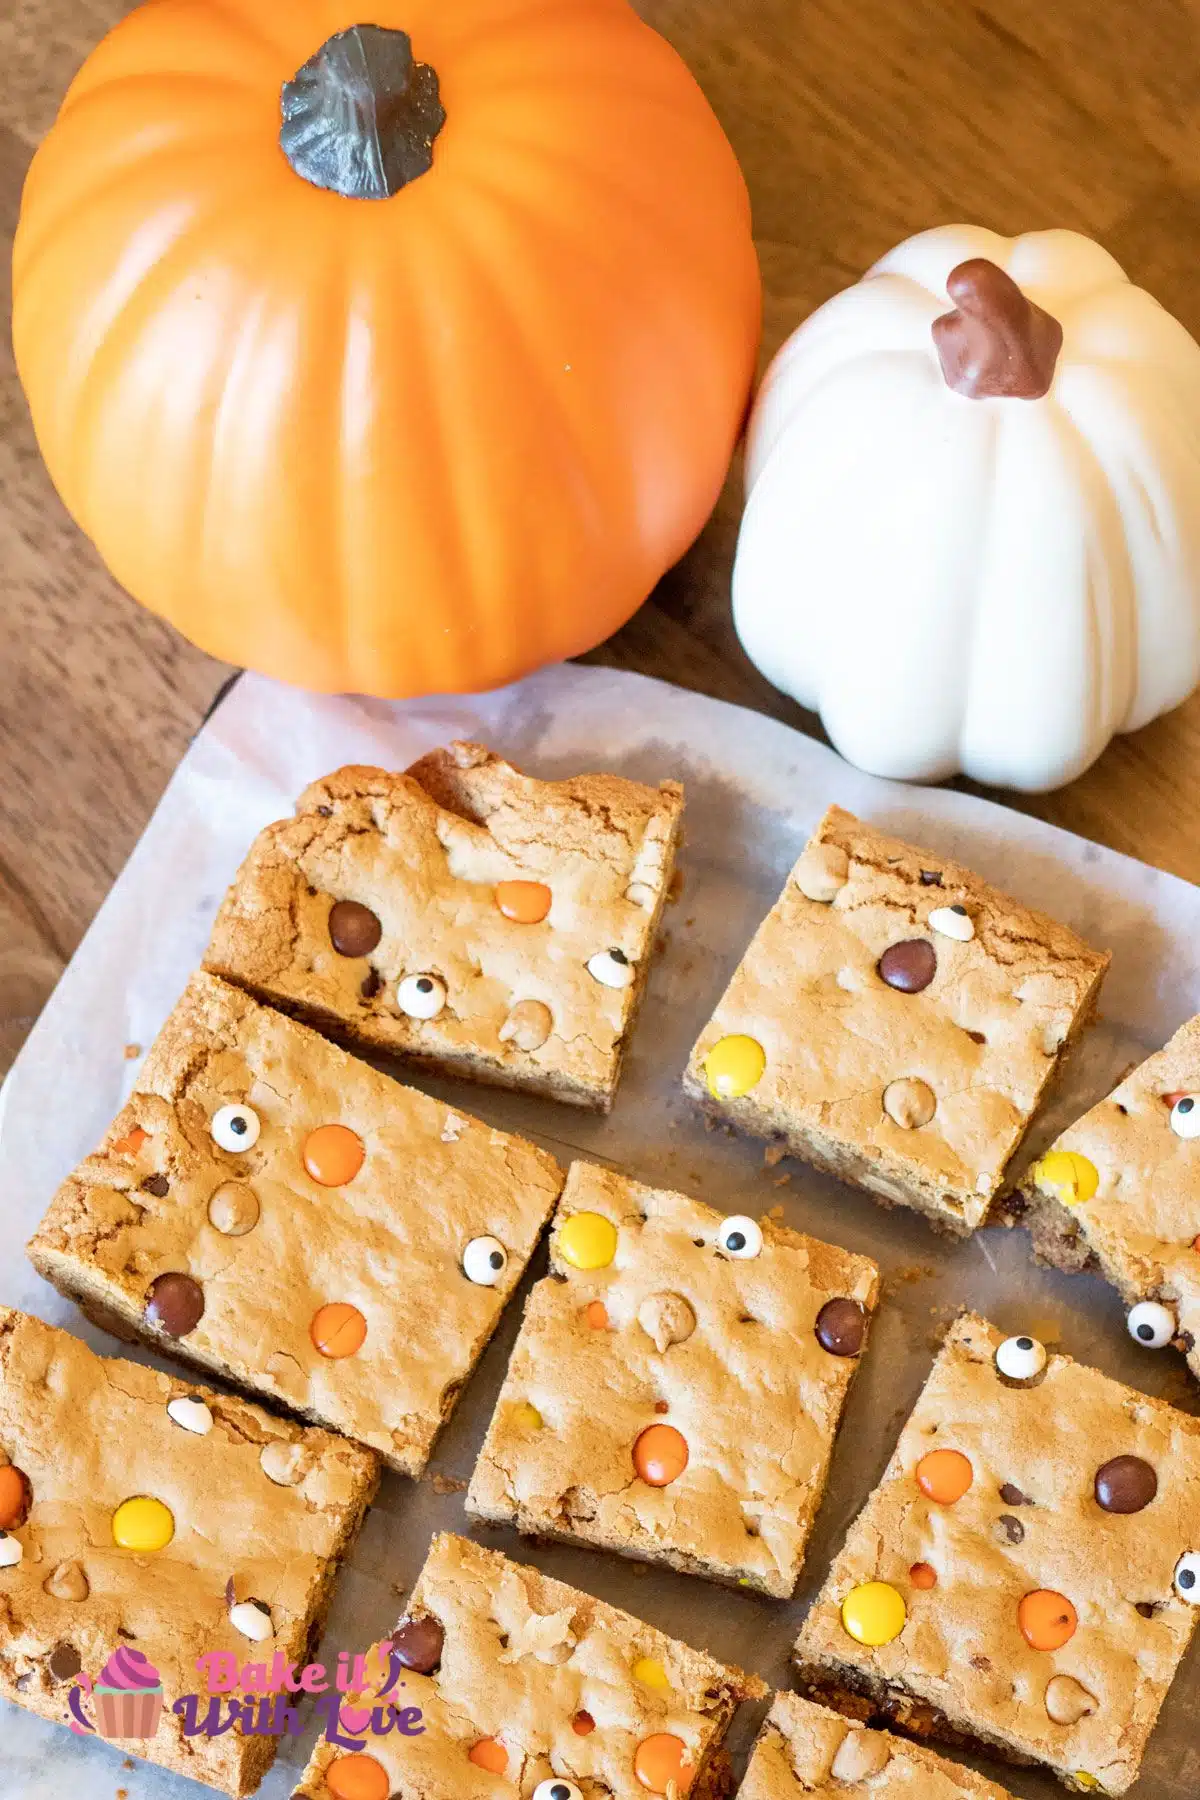 Tall image of Reese's Pieces Halloween bars.